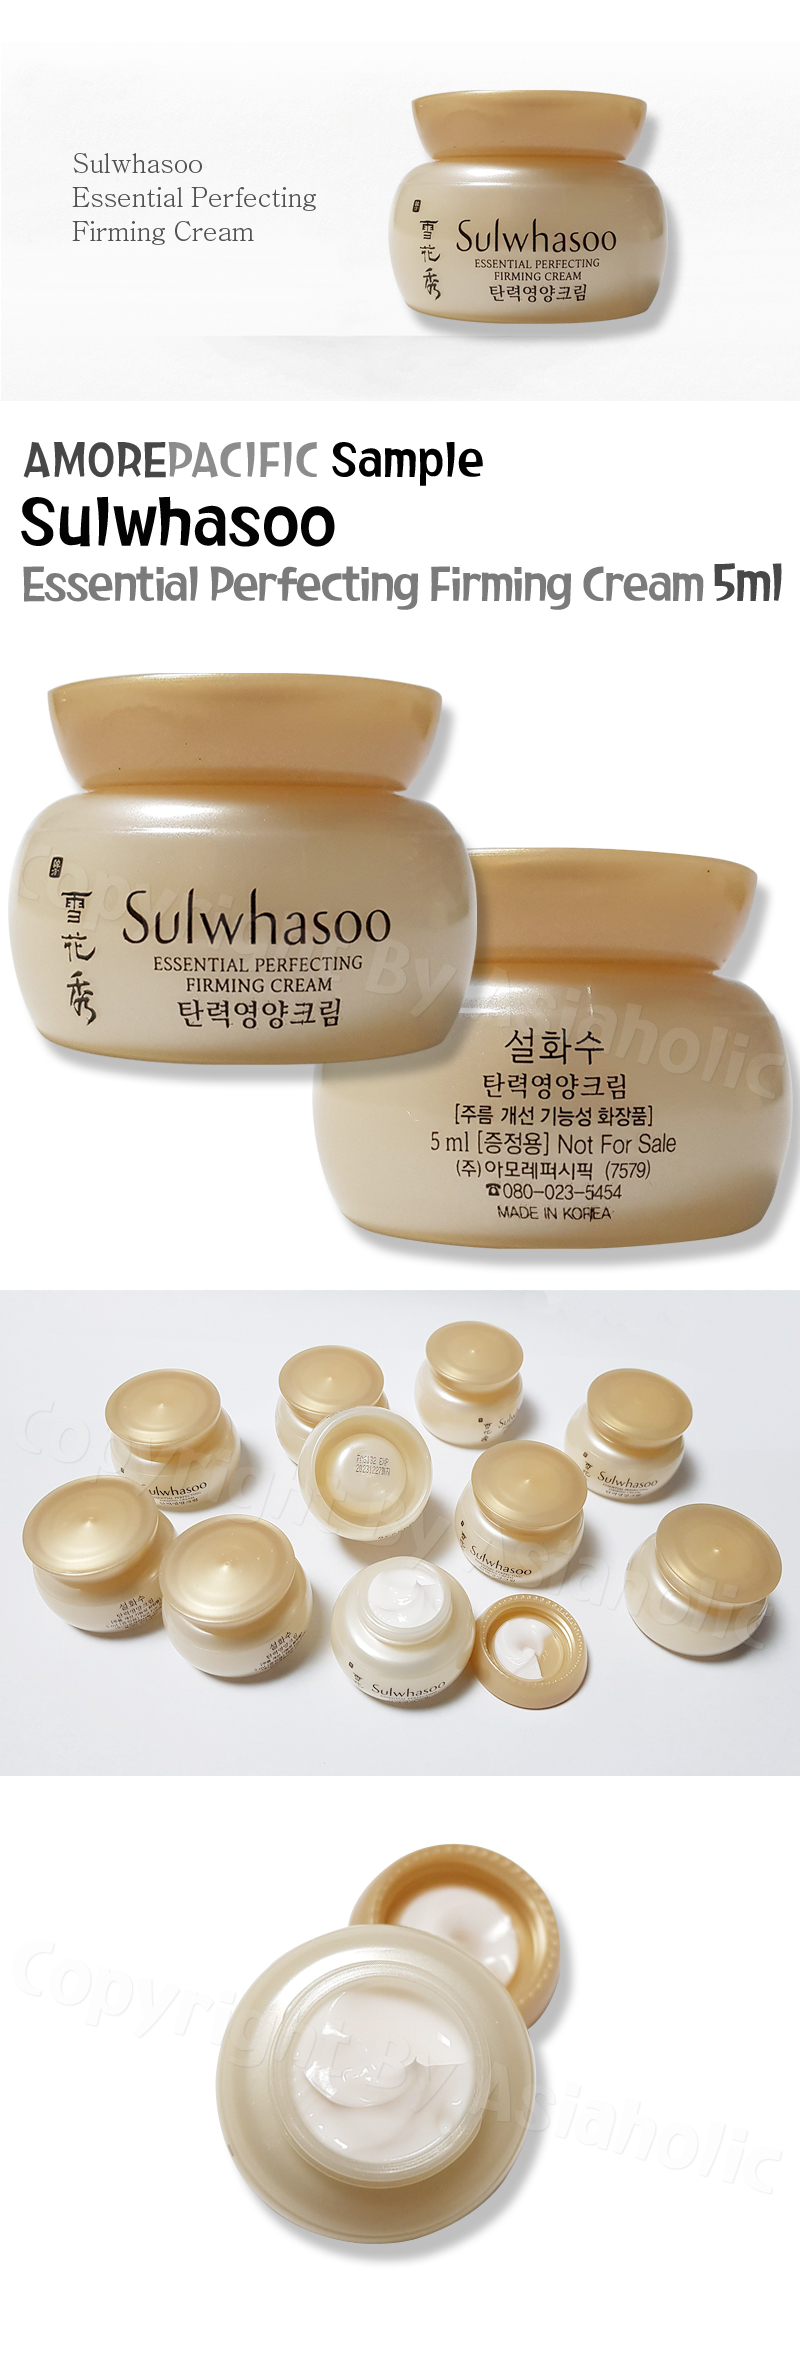 Sulwhasoo Essential Perfecting Firming Cream 5ml x 10pcs (50ml) Sample Newest Version